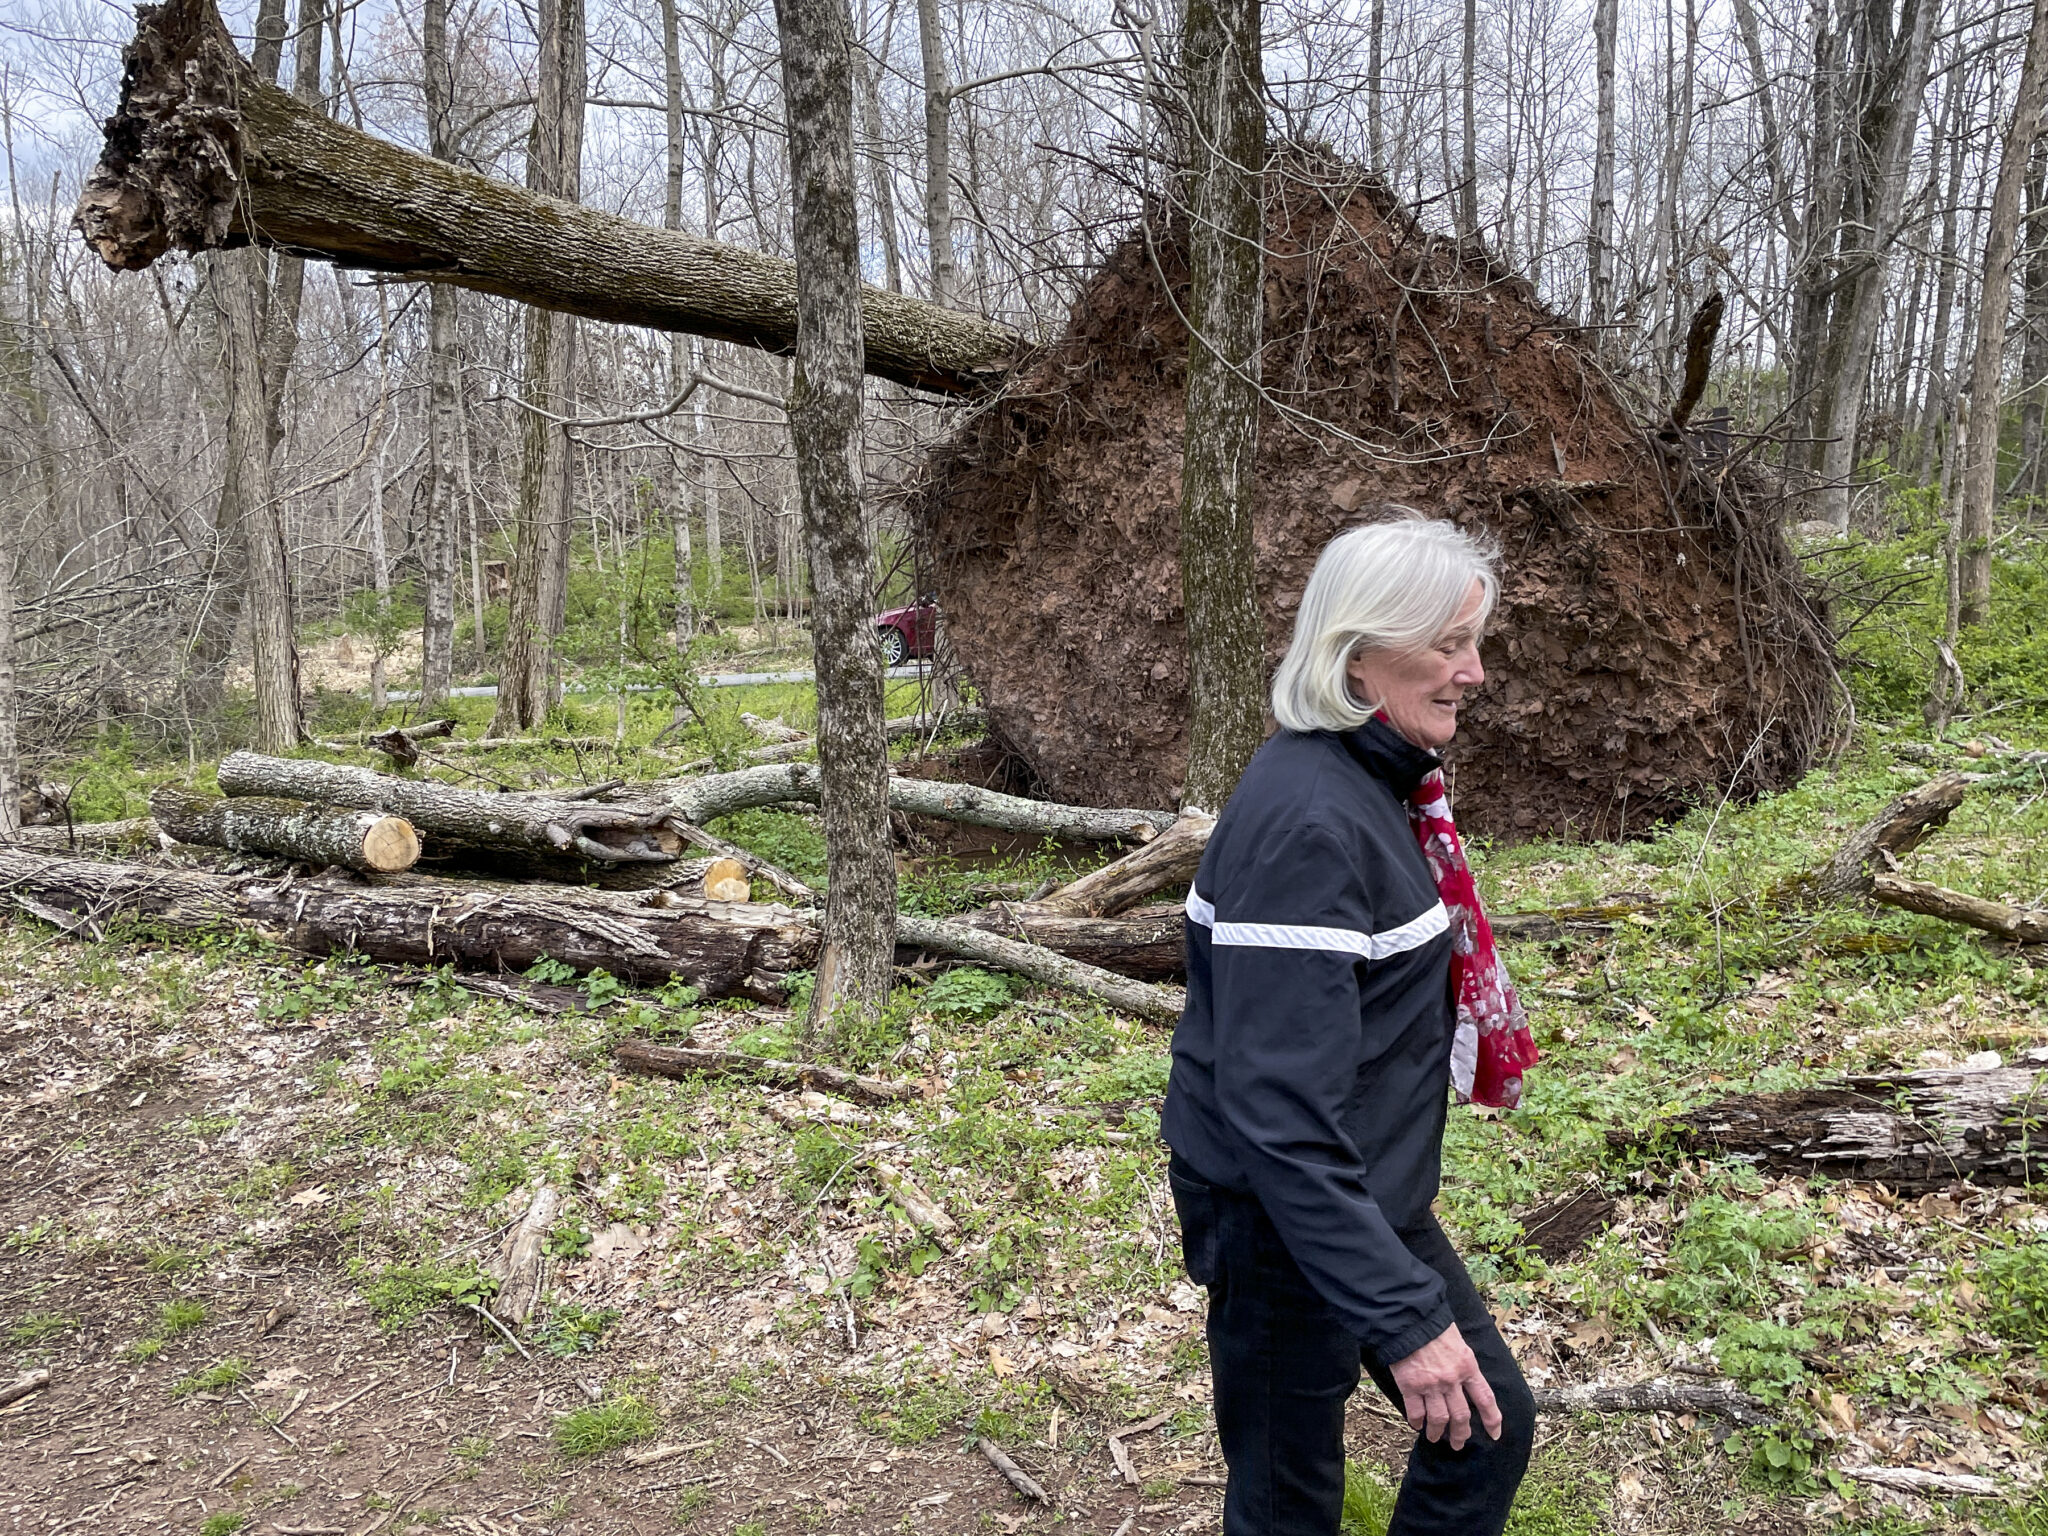 Grey-haired woman walks in front of an uprooted tree in a forest